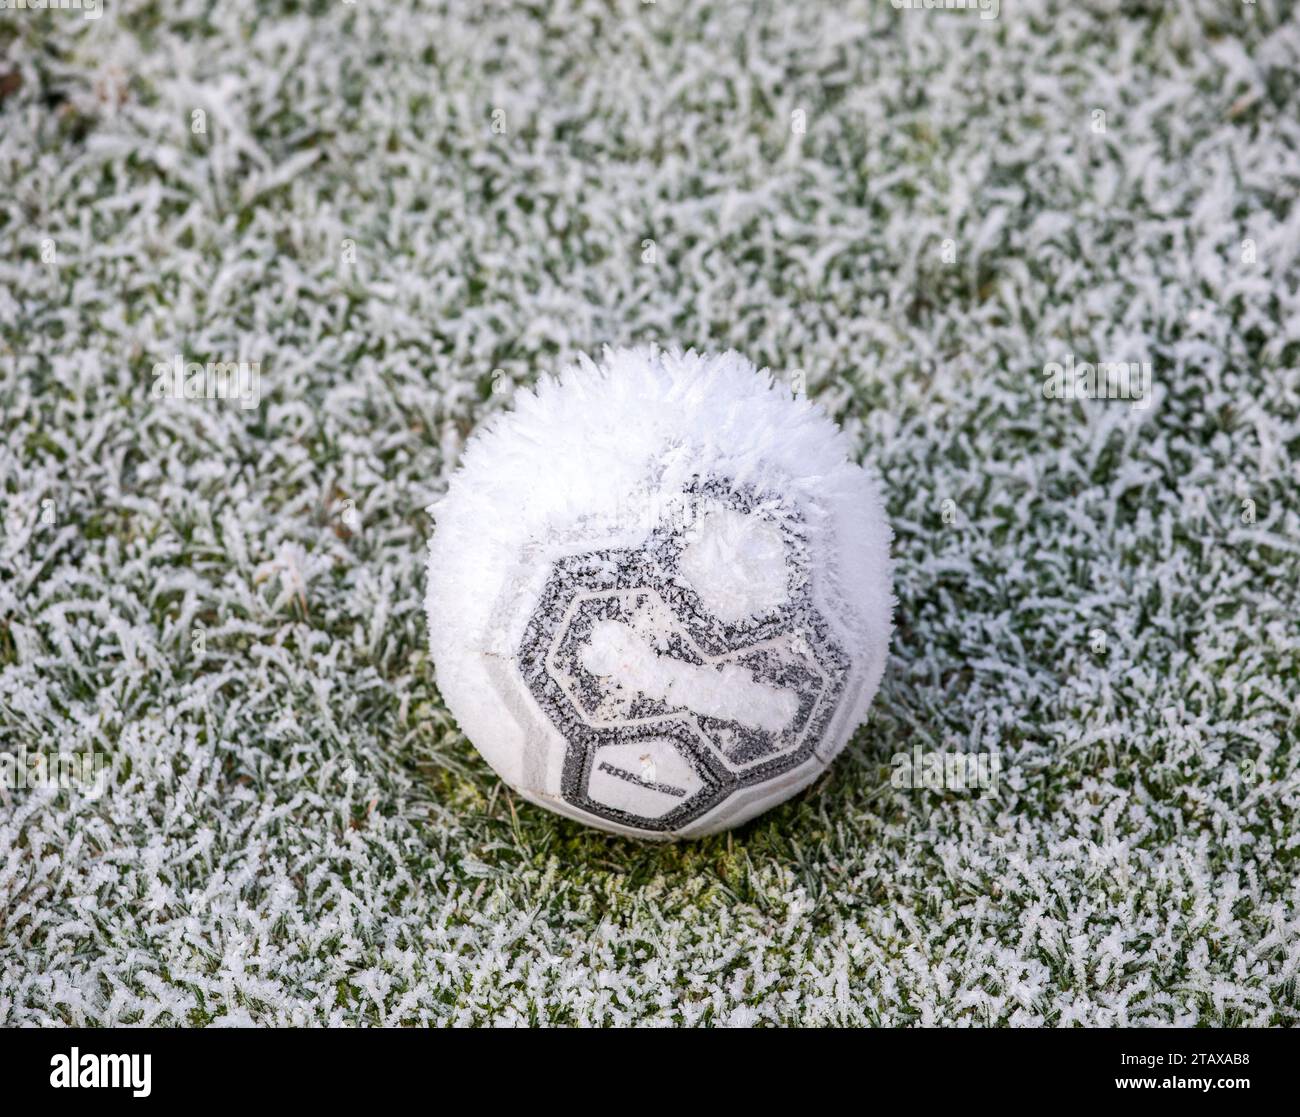 Frozen football on a frozen pitch covered in ice and frost in winter. Stock Photo